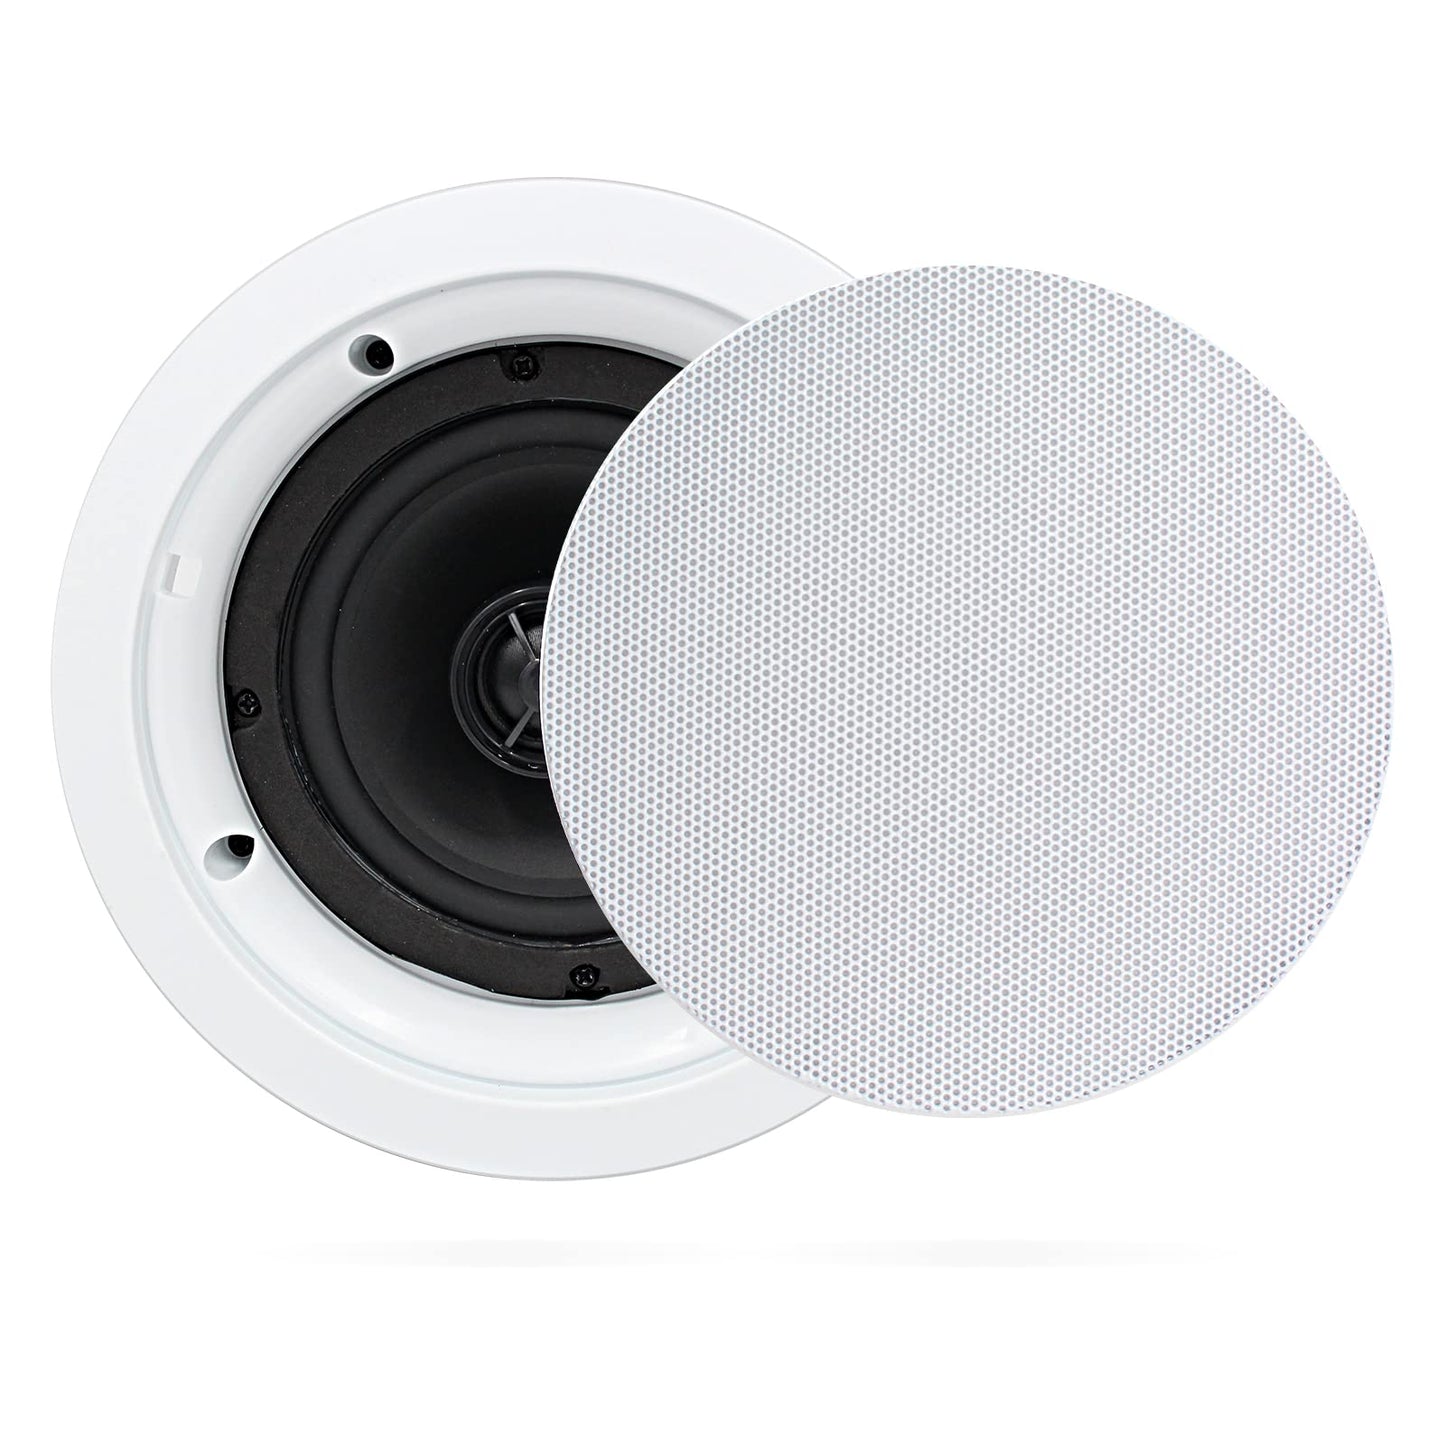 Herdio 5.25 Inch Ceiling Bluetooth Speakers Home recessed Speaker System 300 Watts Perfect for Humid,Kitchen,Bedroom,Bathroom,Covered Patio (A Pair)